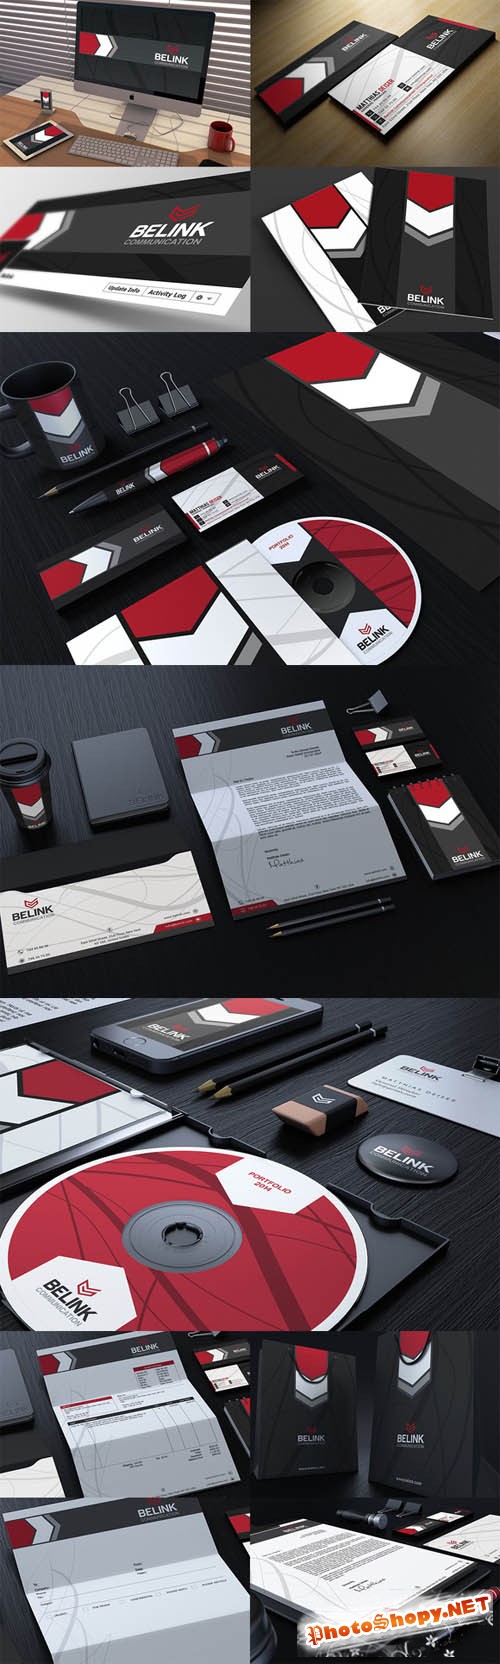 Red And Black Corporate Identity